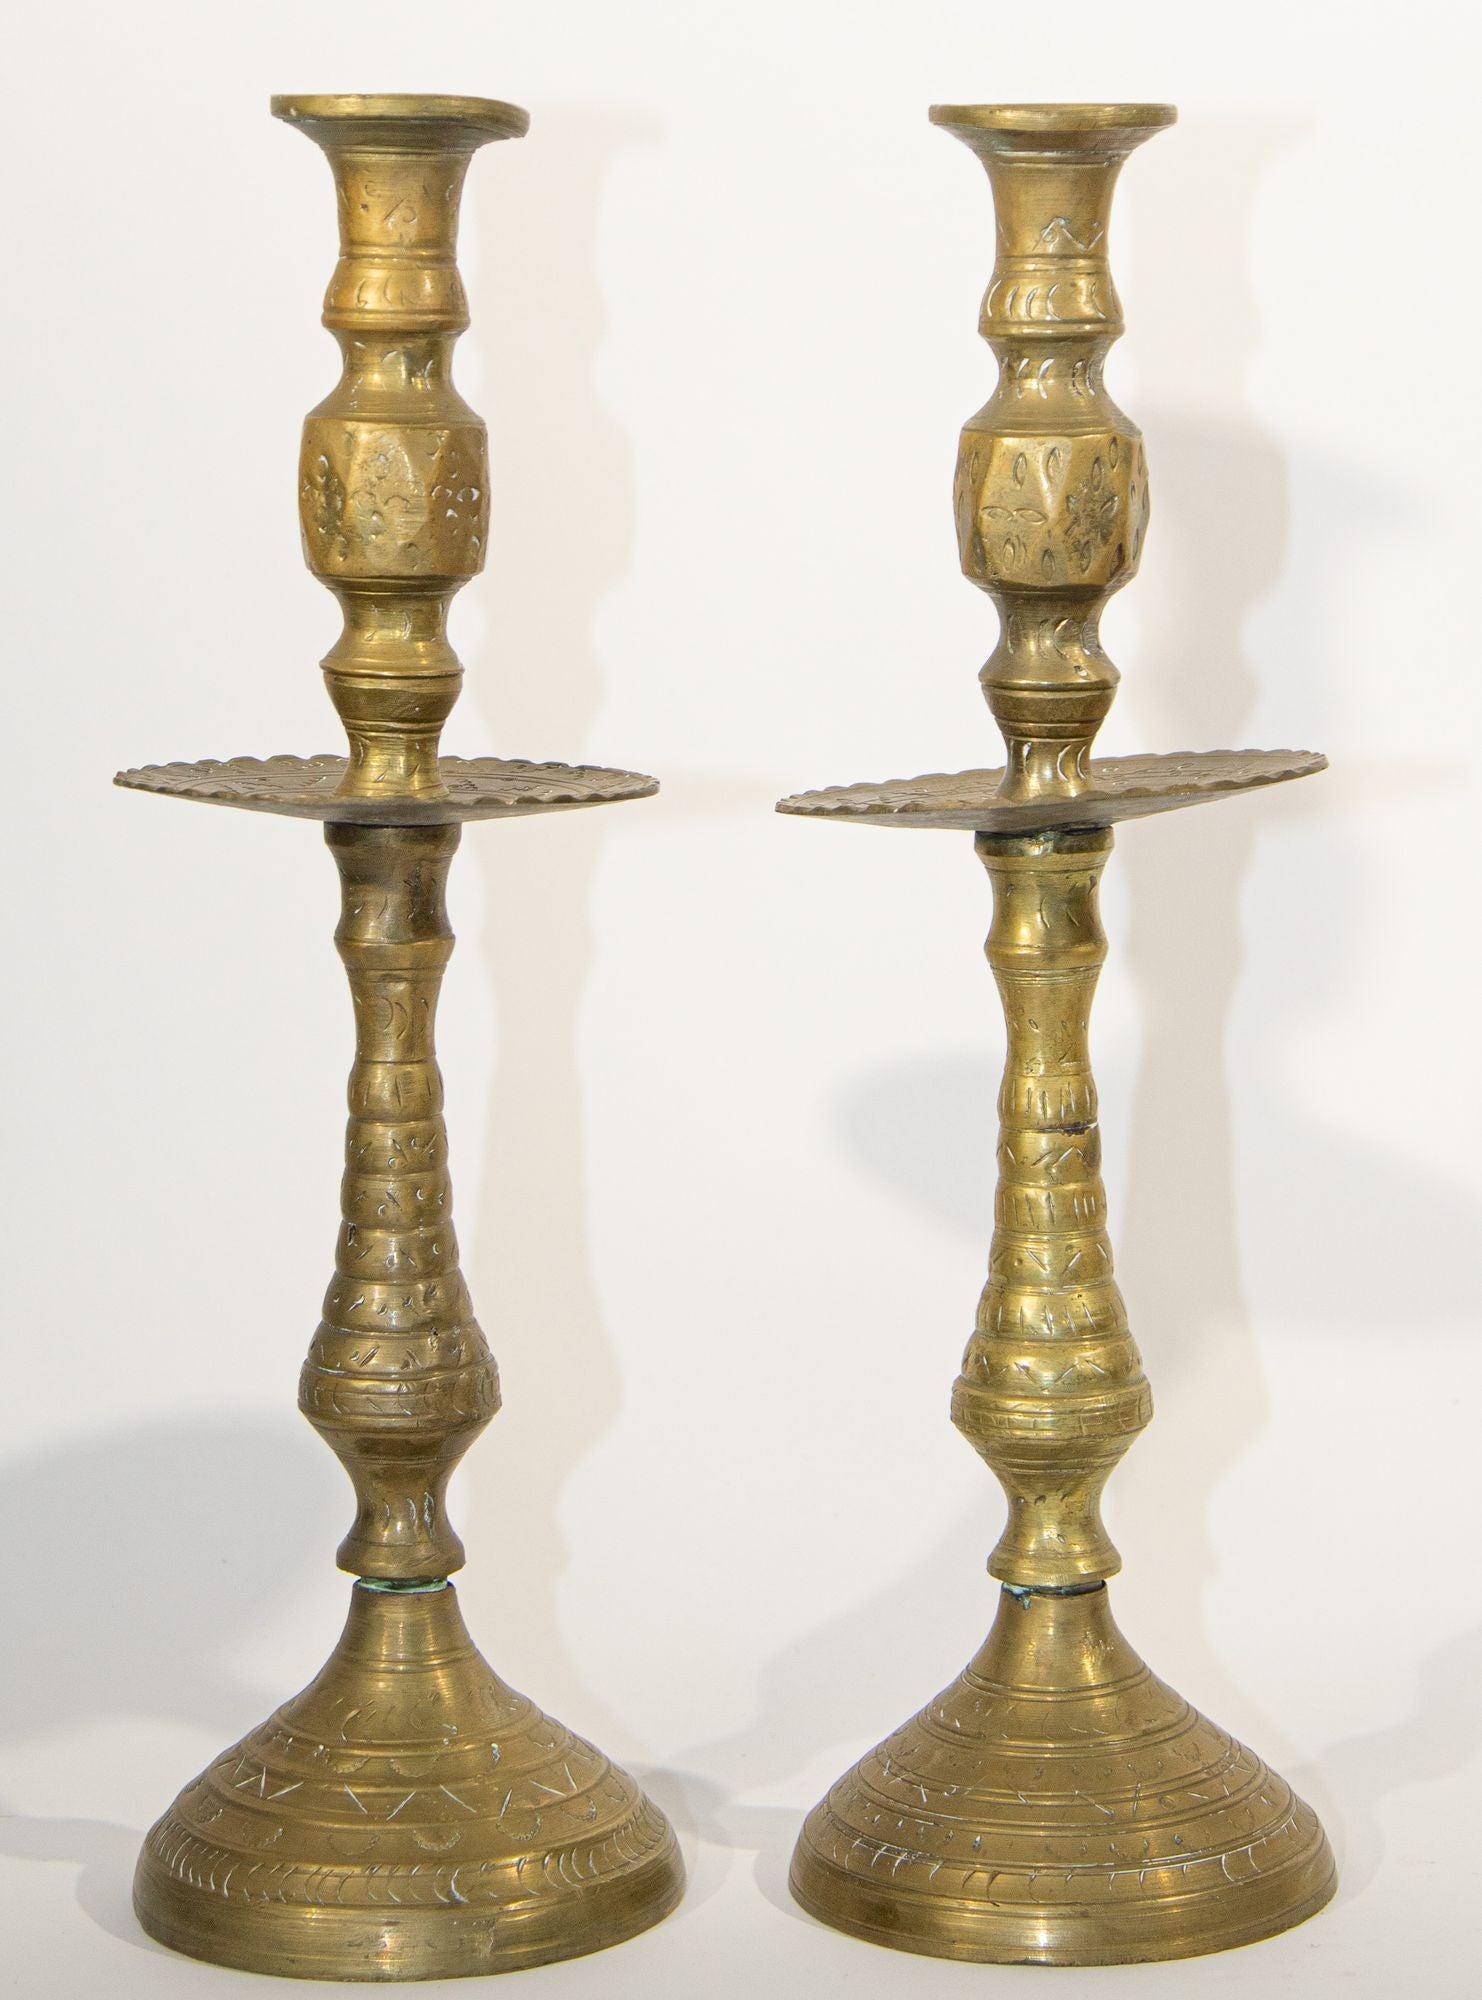 Antique Brass Adjustable Push Up Pair of Candleholders, 19th Century